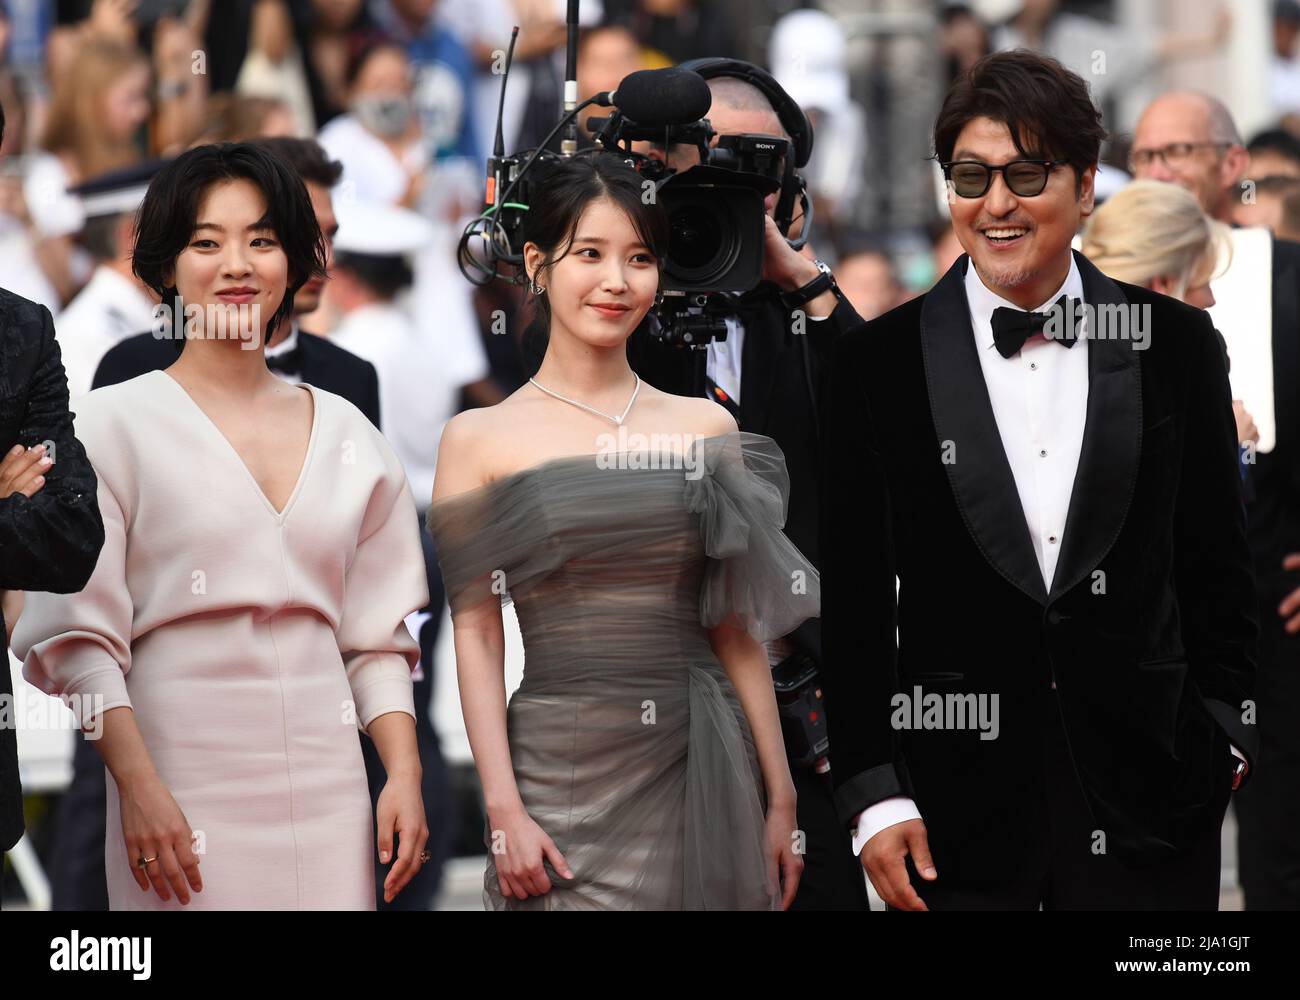 May 26th, 2022. Cannes, France. Lee Joo-Young, Choi Hee-jin and Song Kang-ho attending the Broker Premiere, part of the 75th Cannes Film Festival, Palais de Festival, Cannes. Credit: Doug Peters/EMPICS/Alamy Live News Stock Photo